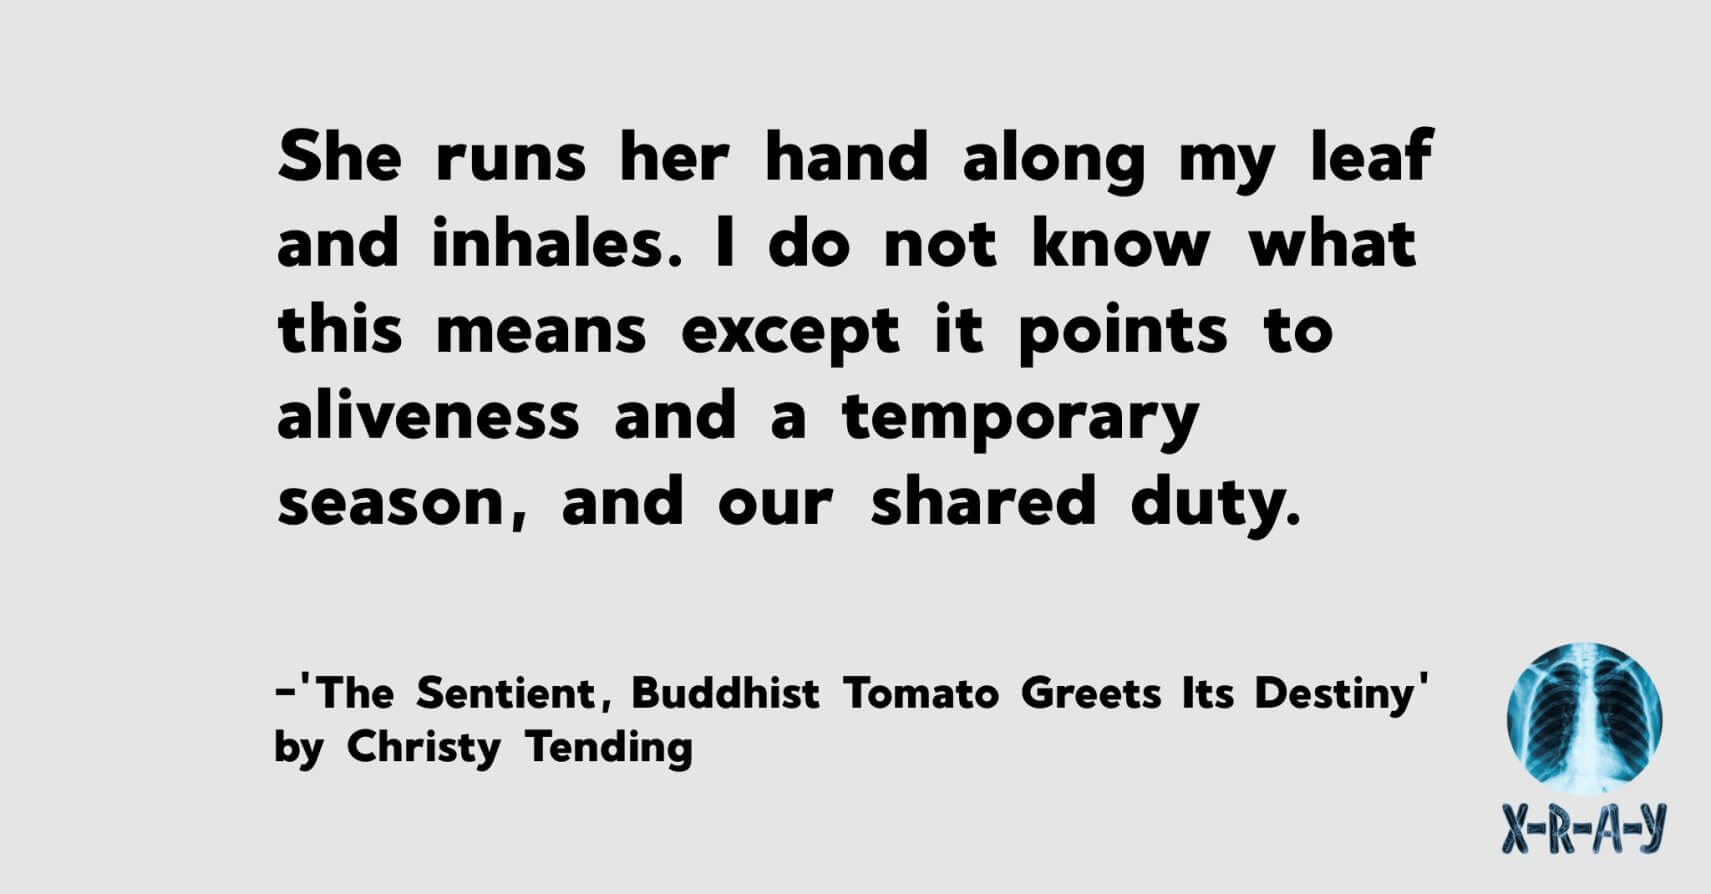 THE SENTIENT, BUDDHIST TOMATO GREETS ITS DESTINY by Christy Tending